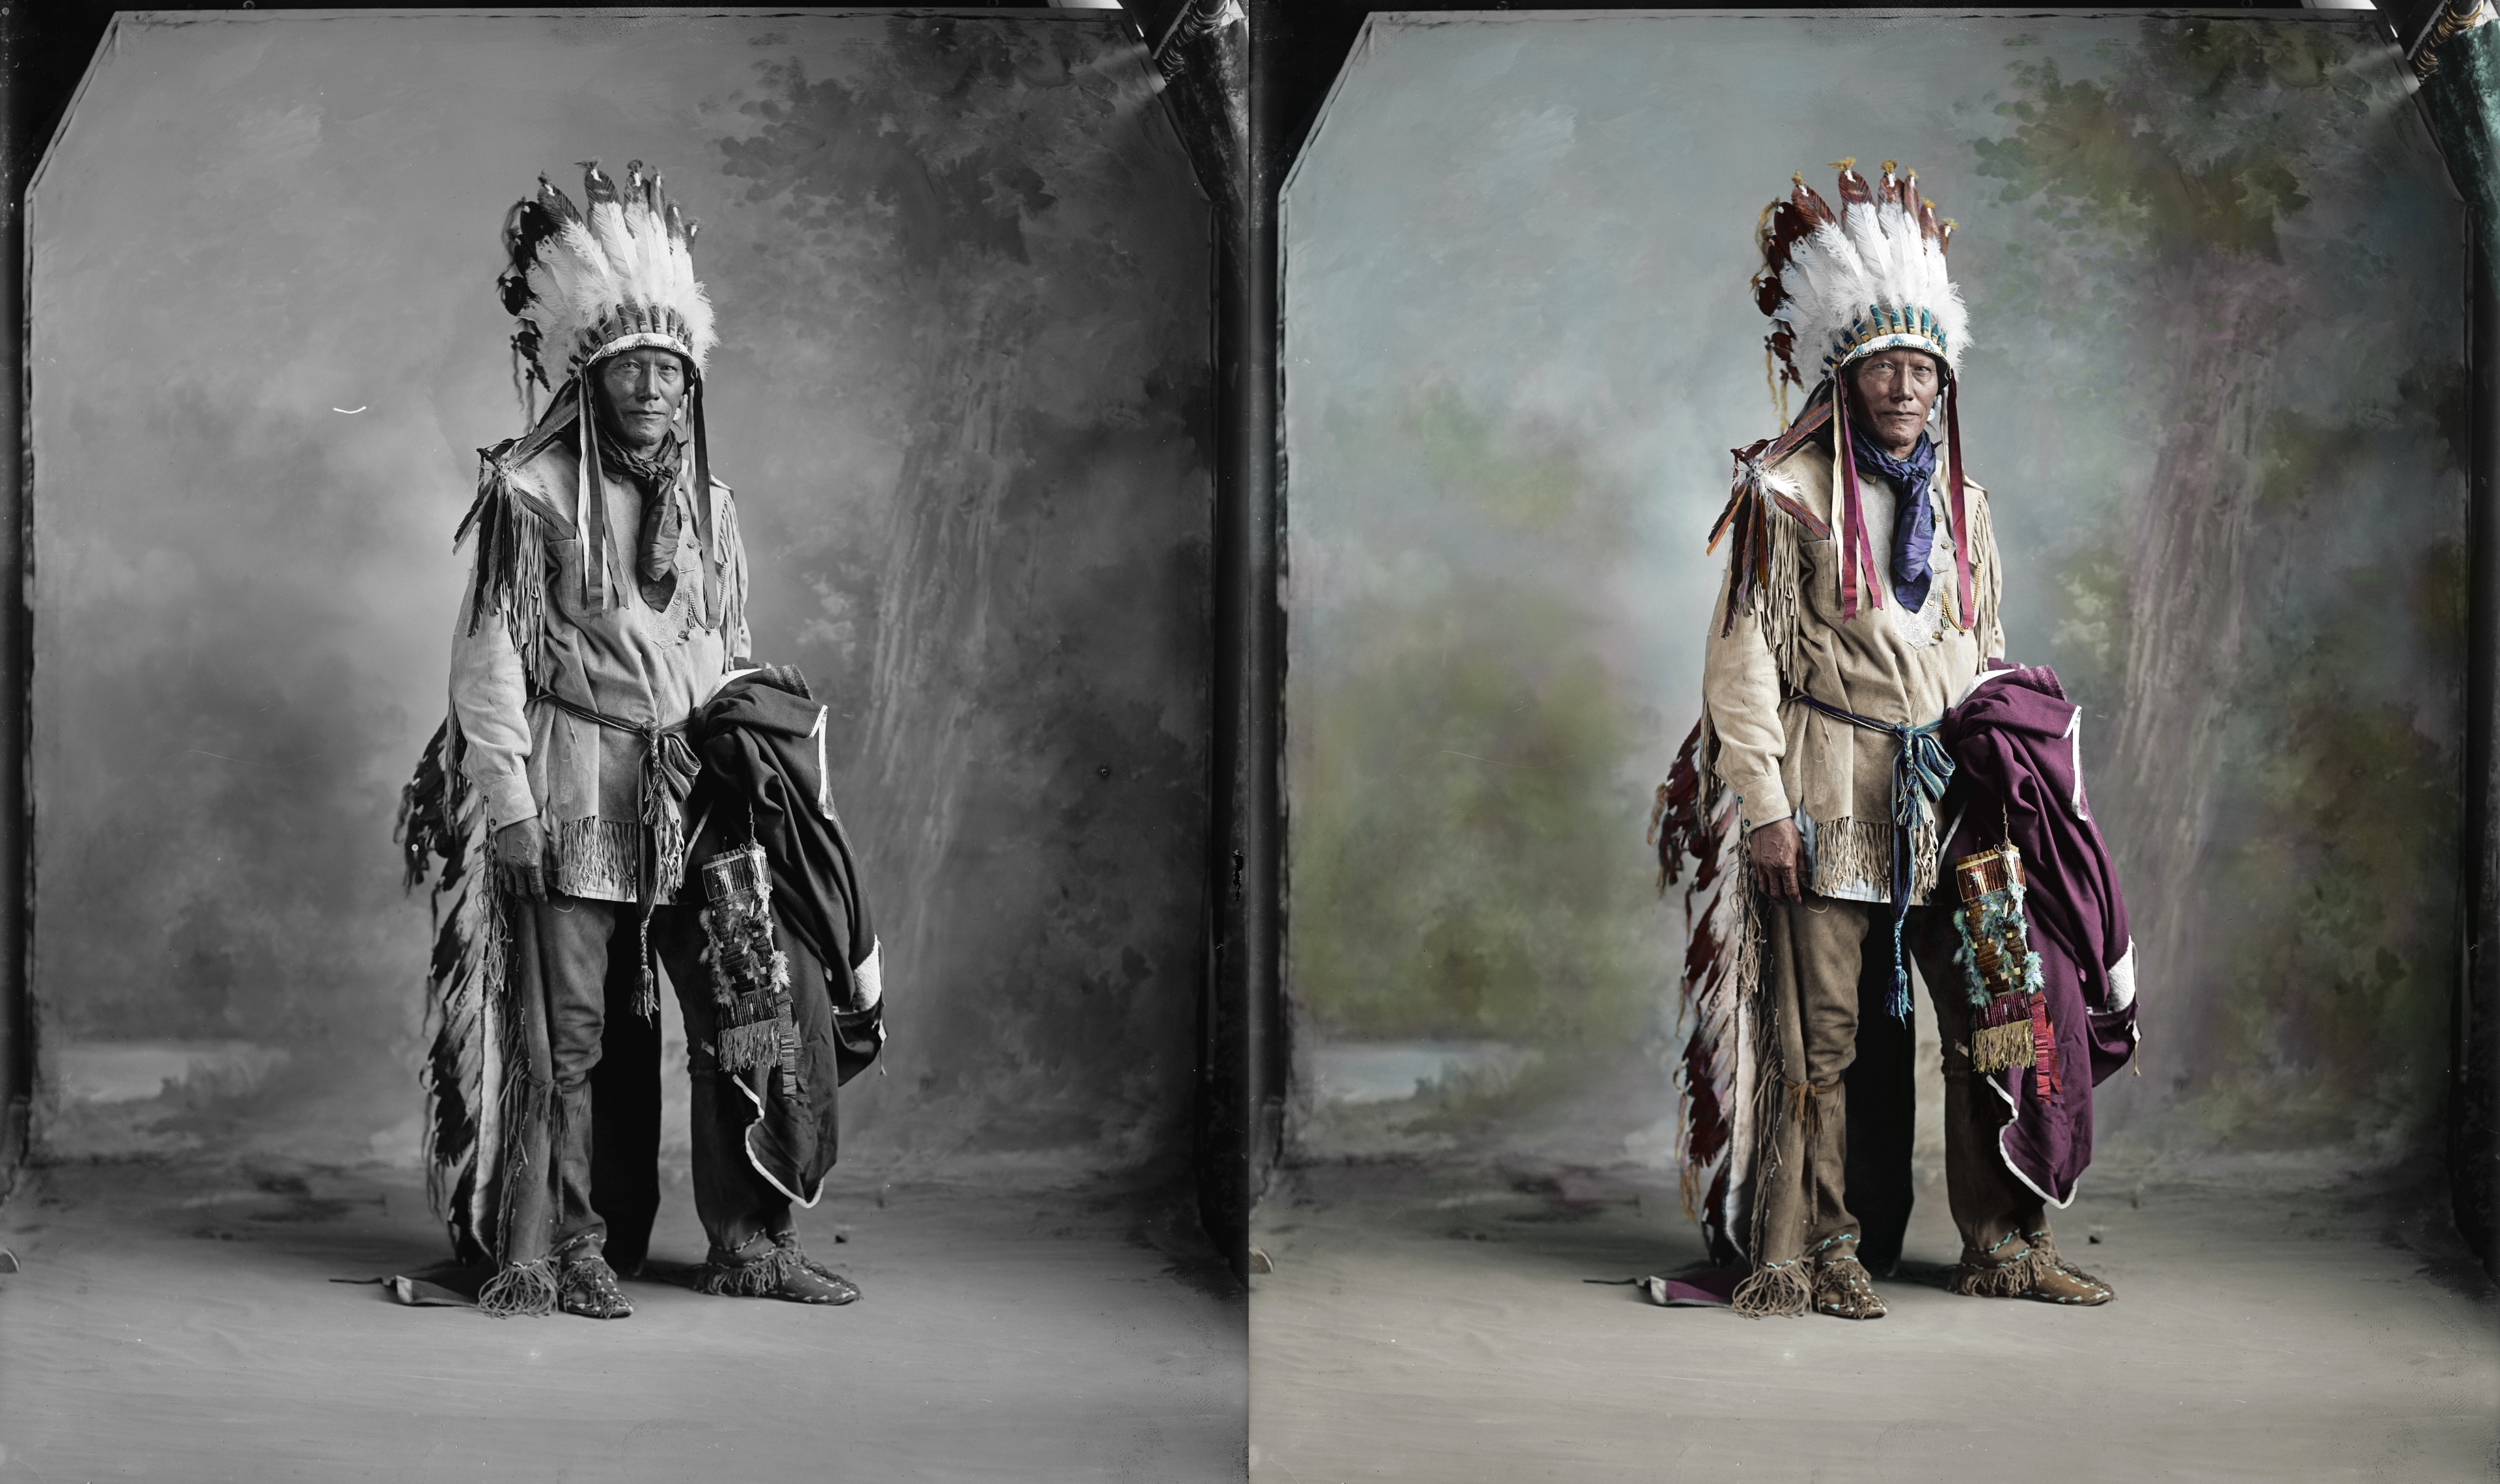 Indian: Porcupine. From Harris & Ewing Glass Negative, Library of Congress, Published between 1905 and 1945. View full size.